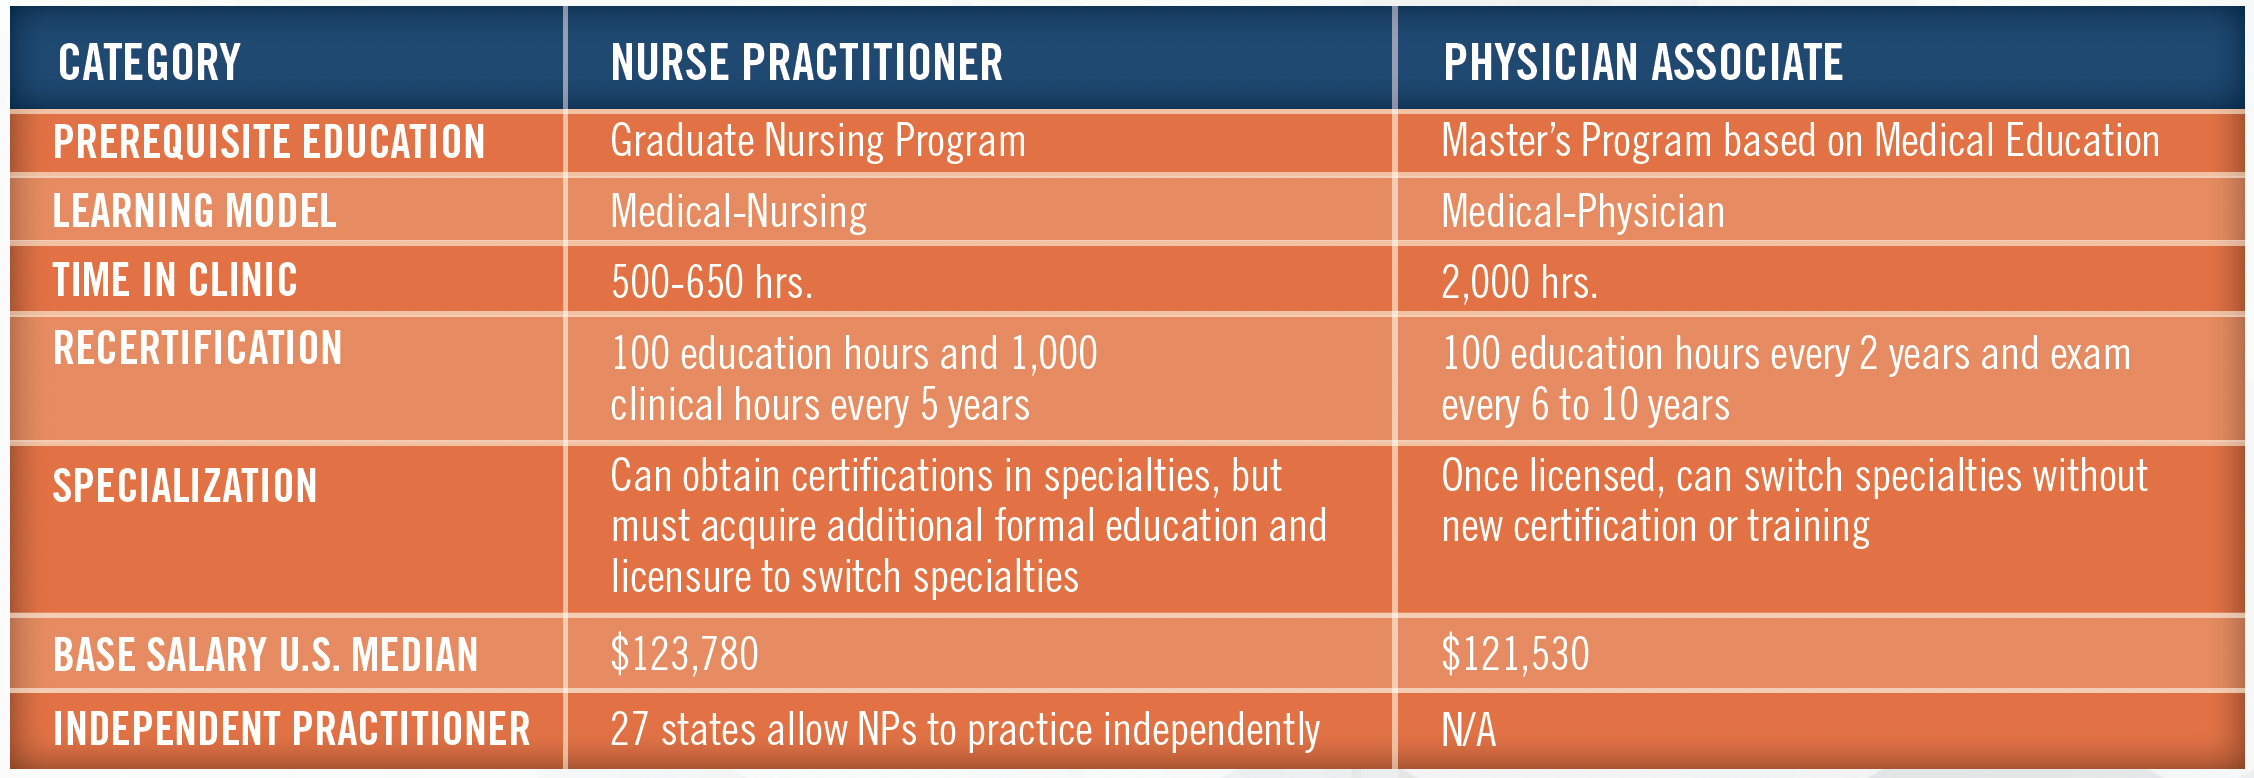 Nurse Practitioners and Physician Associates - A Viable Solution to the Physician Shortage Chart